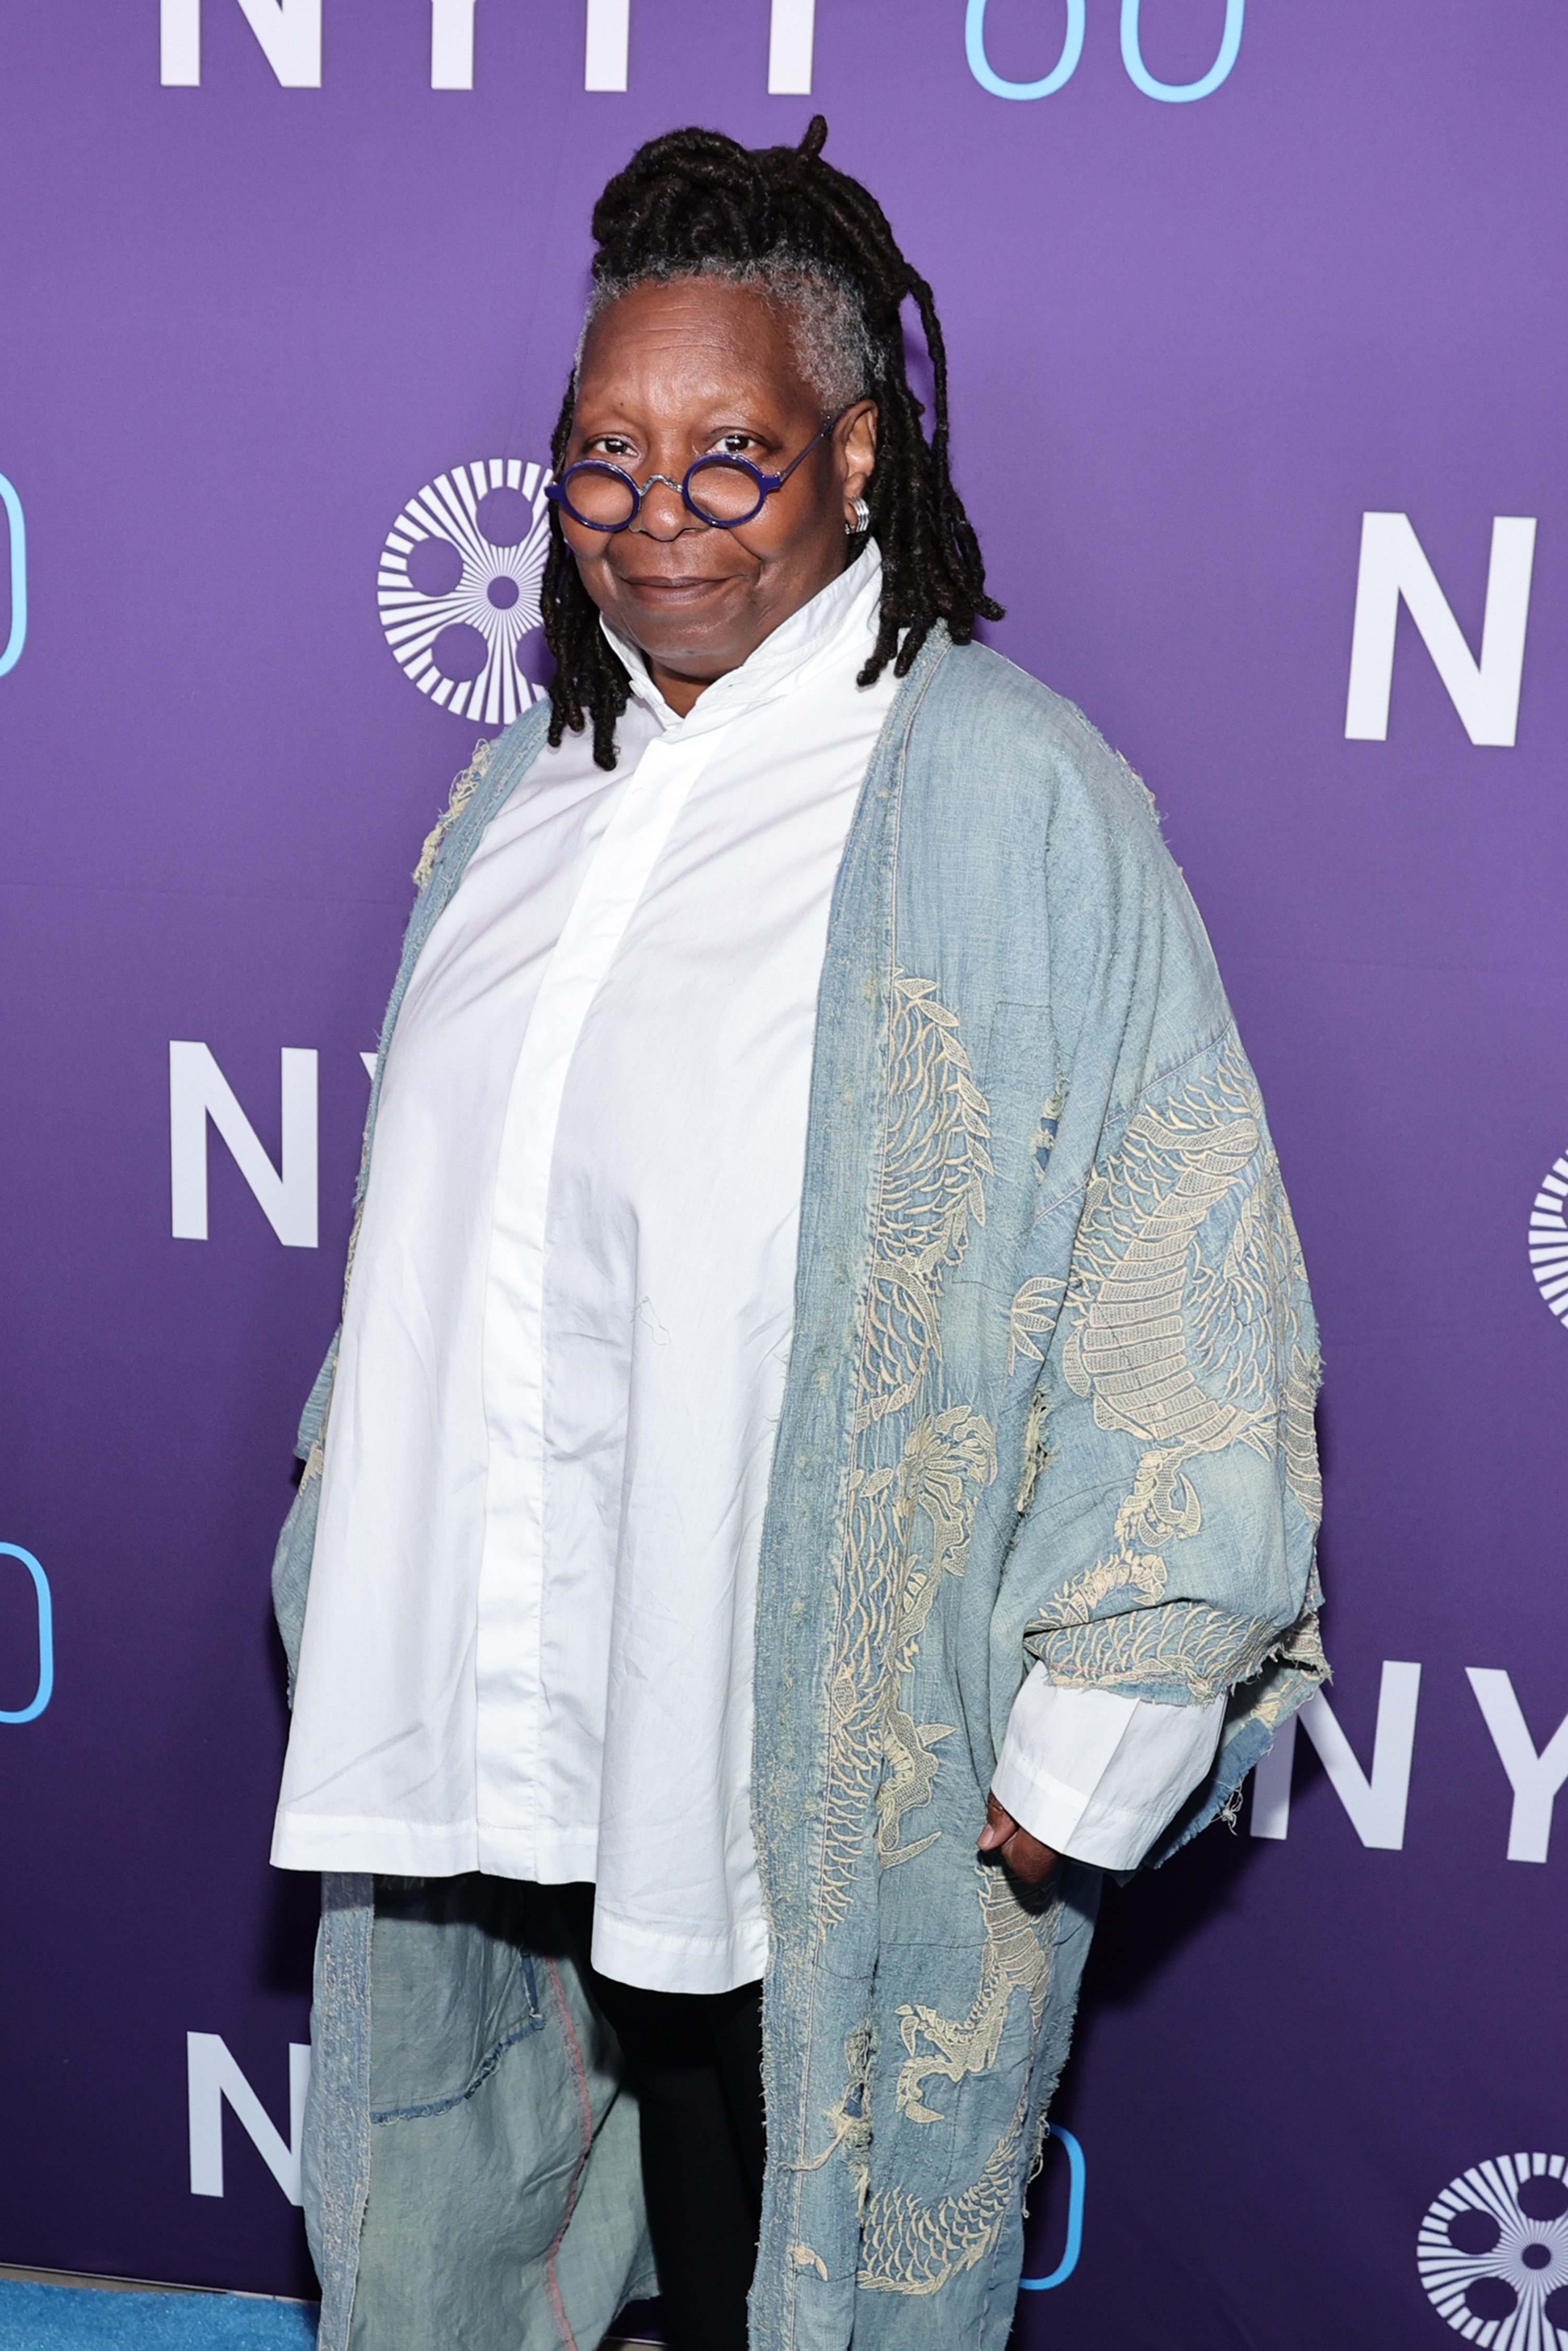 Whoopi Goldberg attends the premiere of "Till" during the 60th New York Film Festival at Alice Tully Hall, Lincoln Center on October 1, 2022, in New York City. | Source: Getty Images